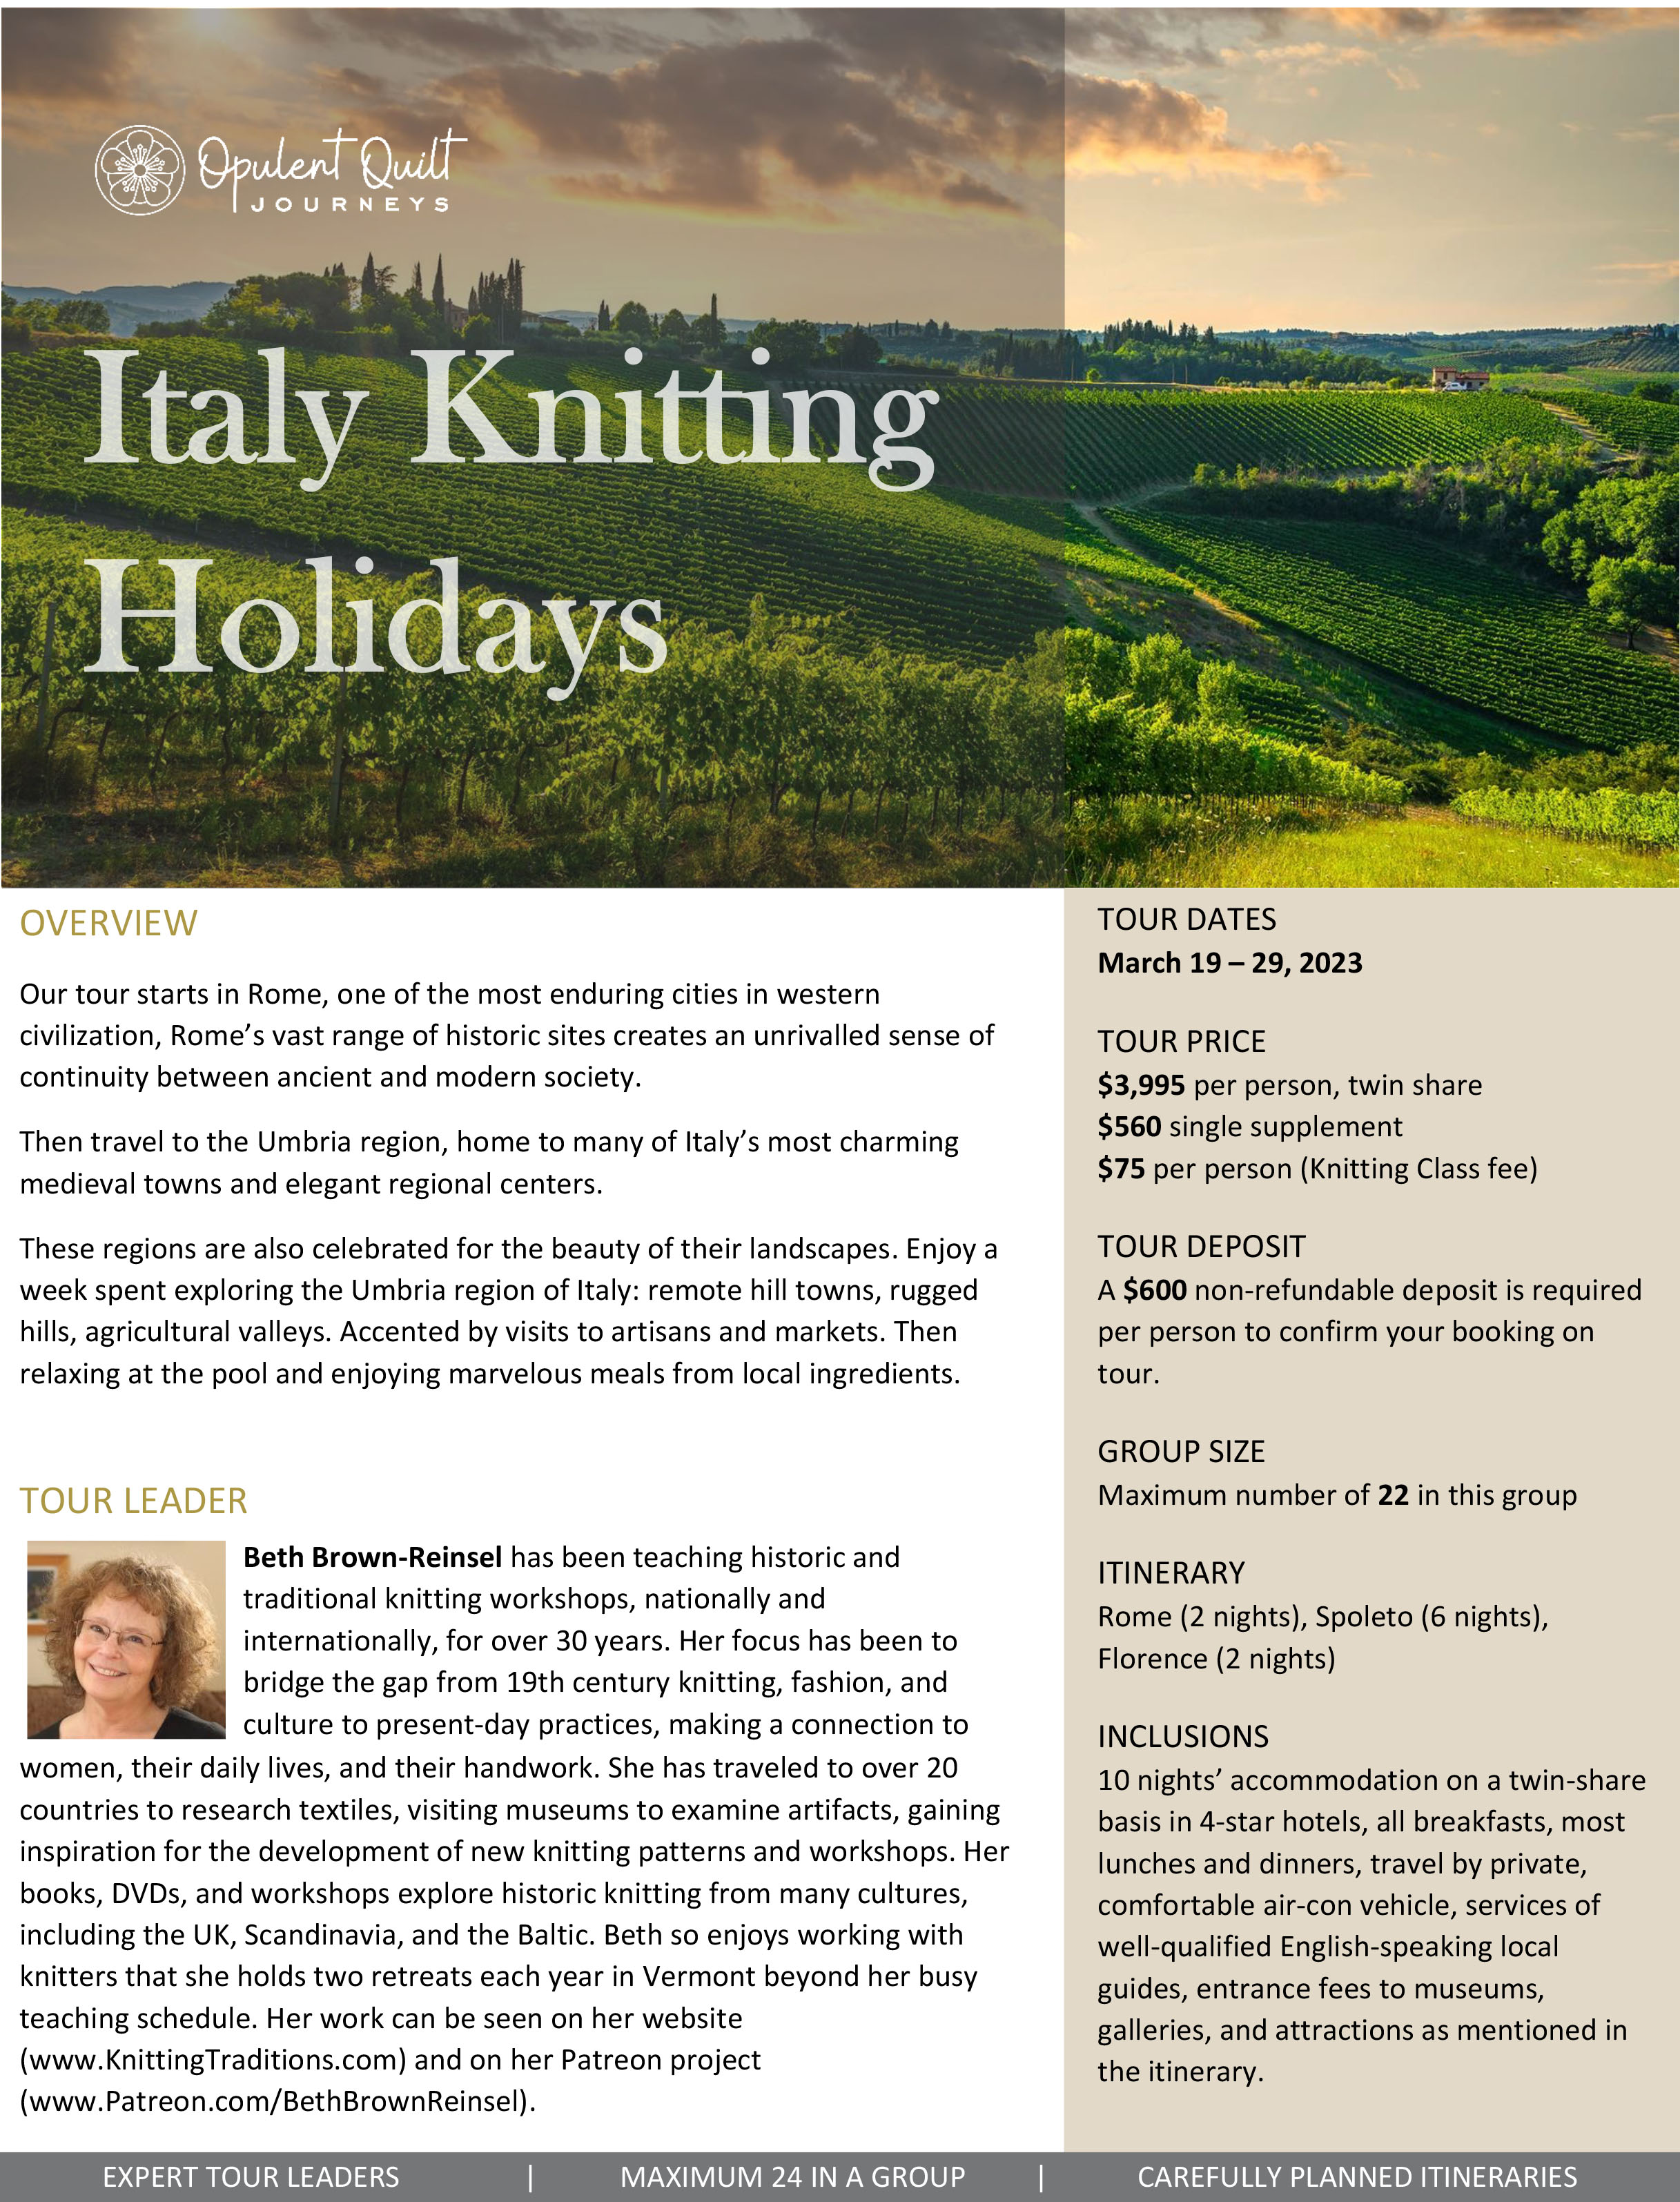 Italy Knitting Holidays with Beth Brown-Reinsel